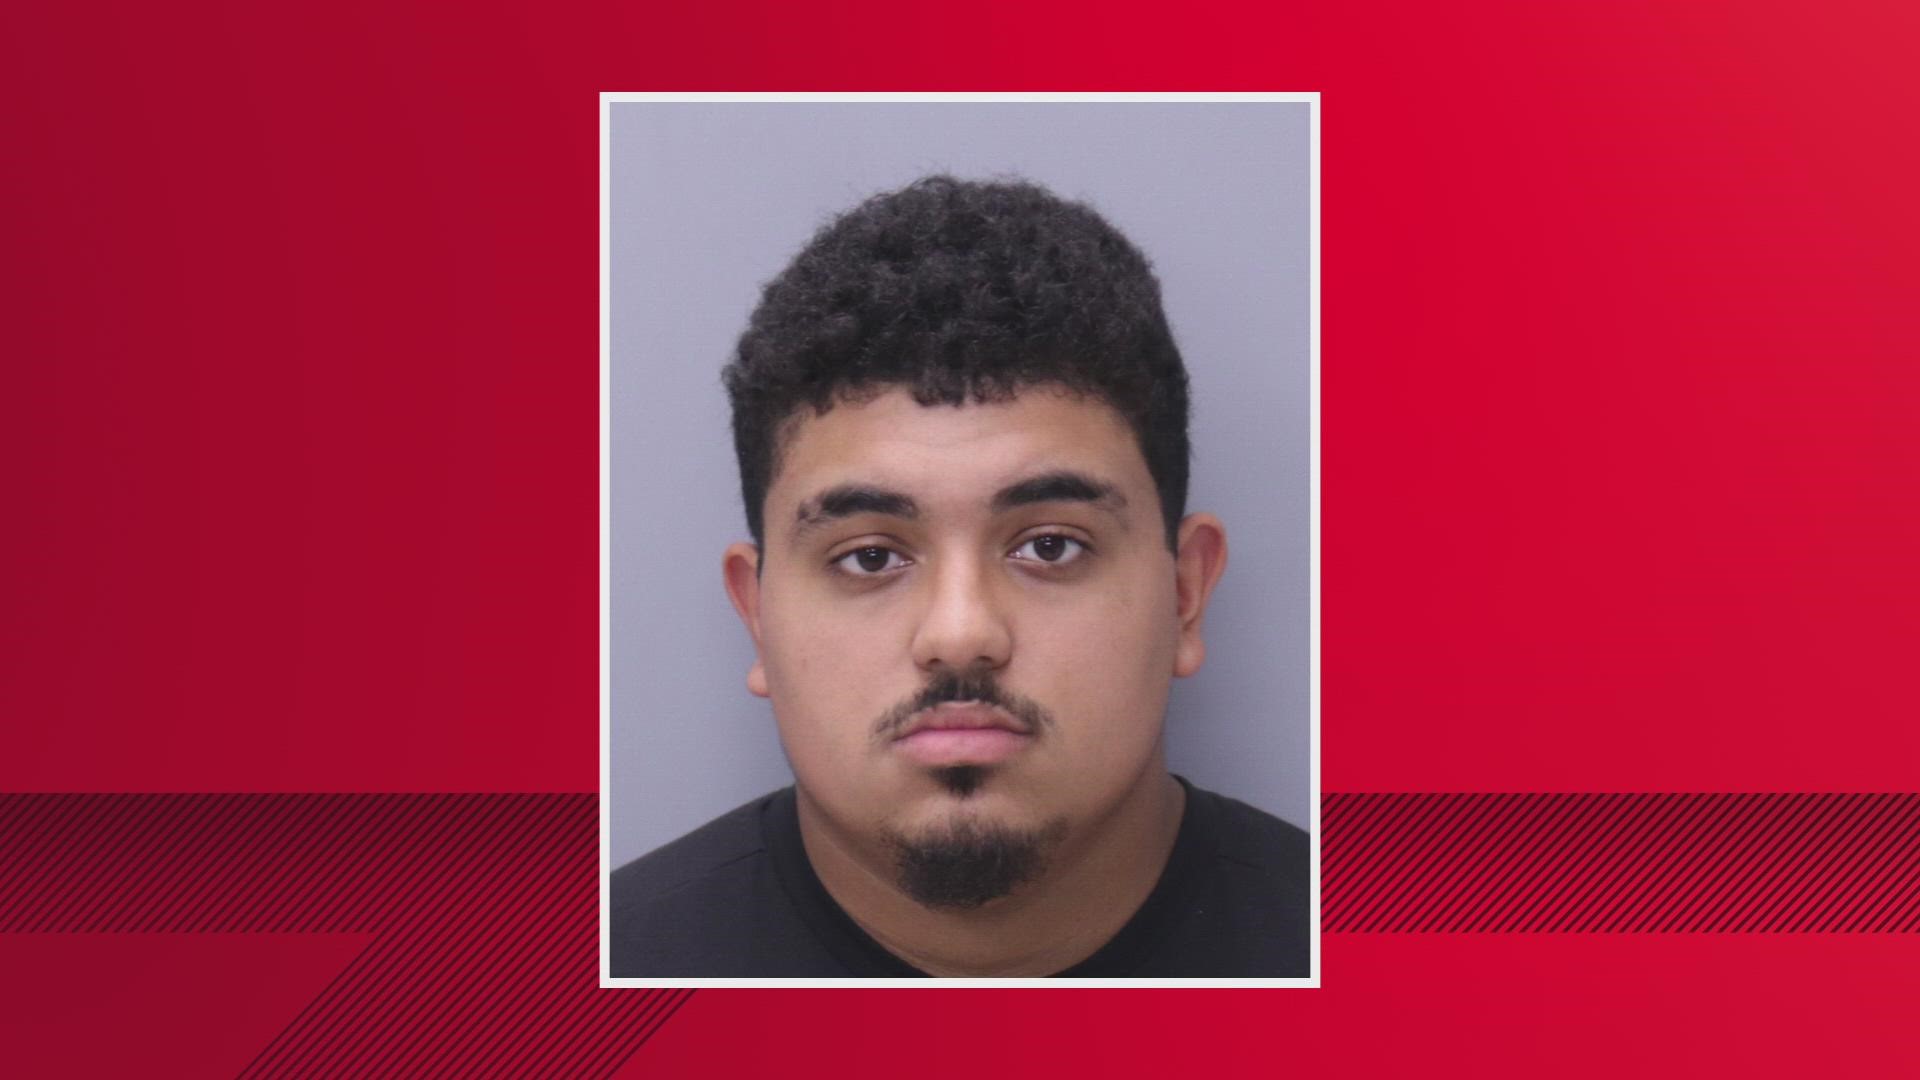 Anthony Guadalupe, seen here, was arrested after parents told police he was caught on tape touching their child.